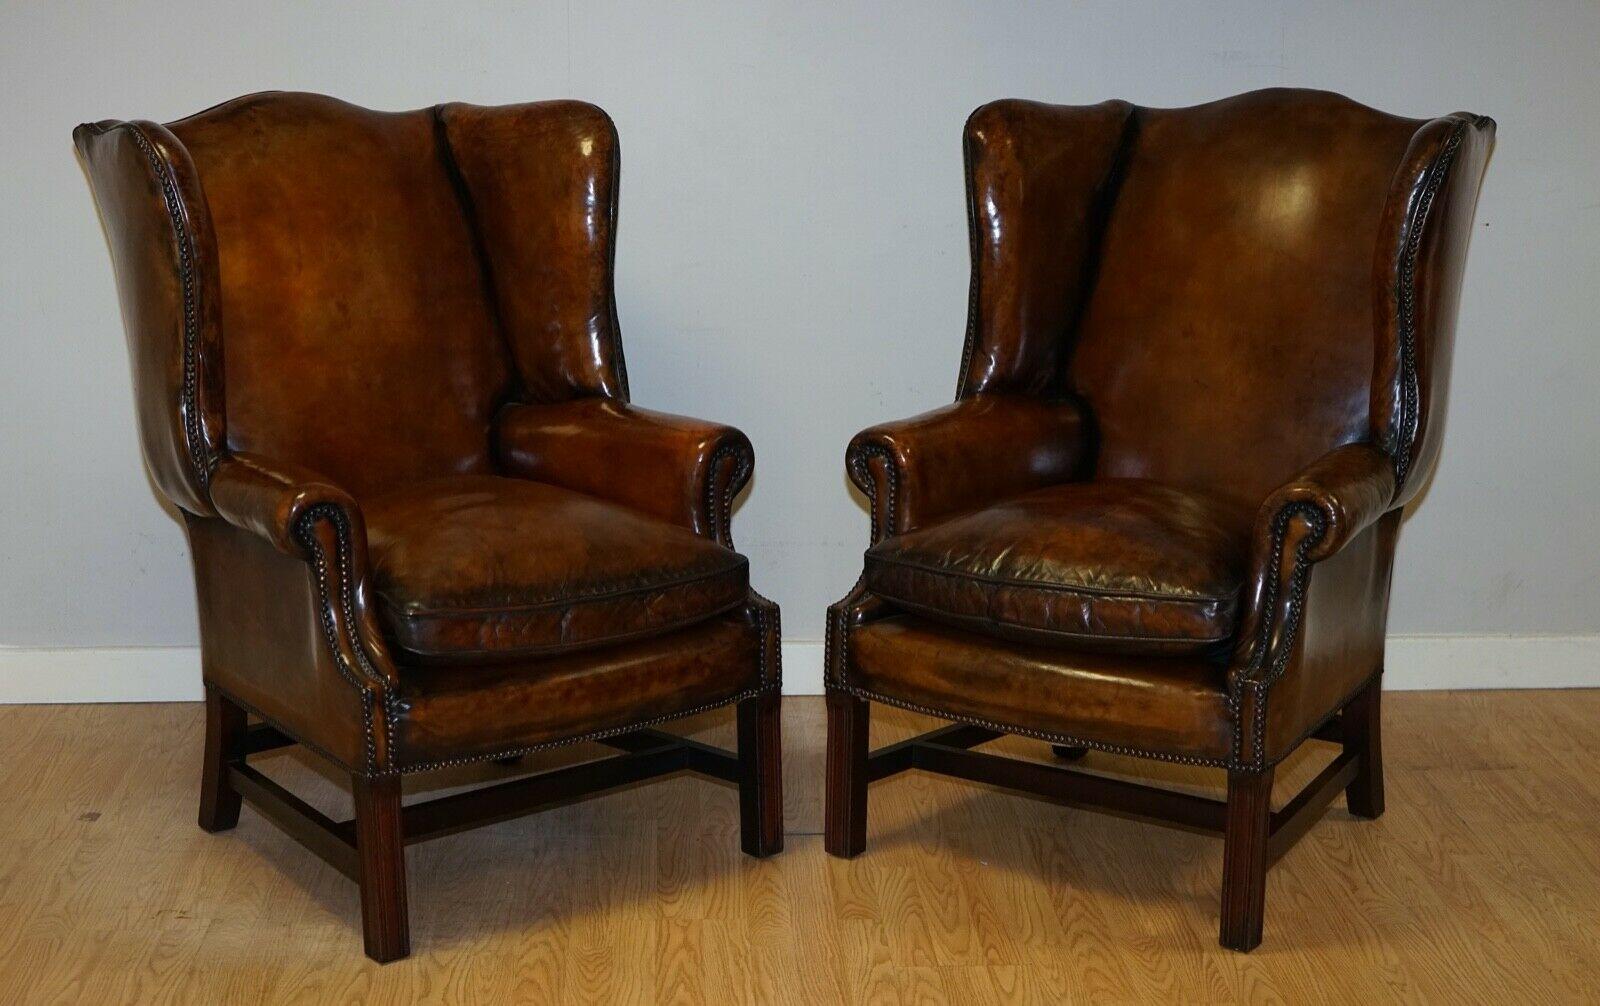 We are delighted to offer for sale these lovely pair of very comfortable feather filled cushion vintage George H style frame wingback chairs.
A good looking and comfortable pair of coil sprung vintage wingback armchairs, with feather filled seats.